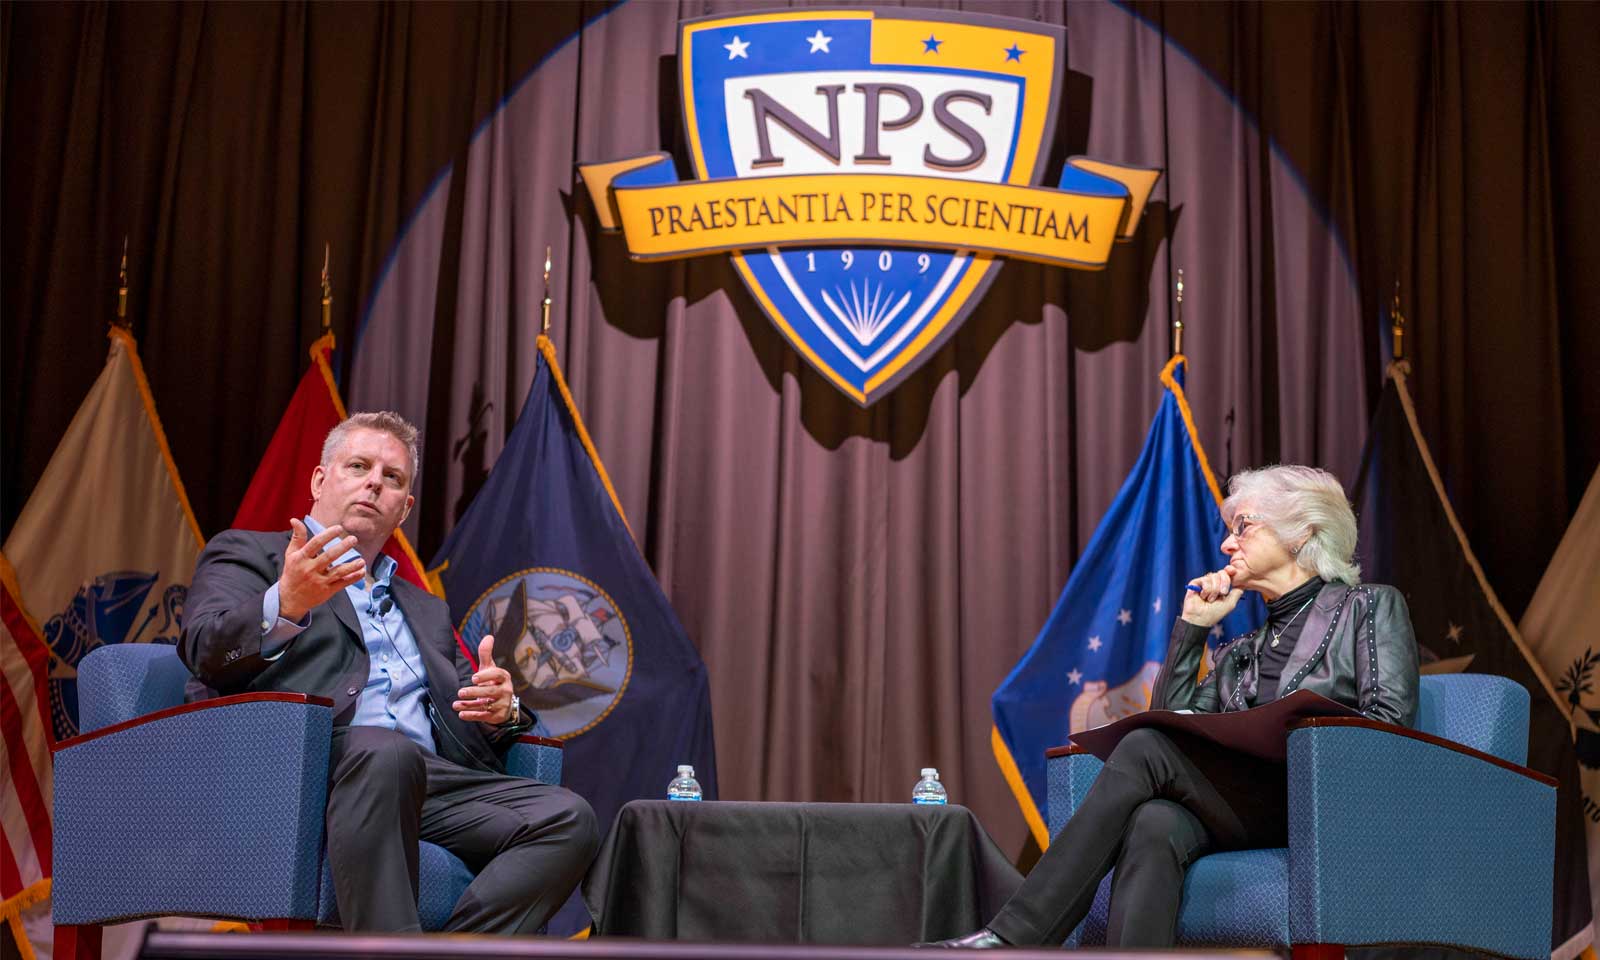 Jason Zander, executive vice president at Microsoft, left, discusses cyberspace and the importance of public-private partnerships with Naval Postgraduate School President retired Vice Adm. Ann Rondeau during the latest Secretary of the Navy Guest Lecture (SGL), June 6. (U.S. Navy photo by MC2 Lenny Weston)